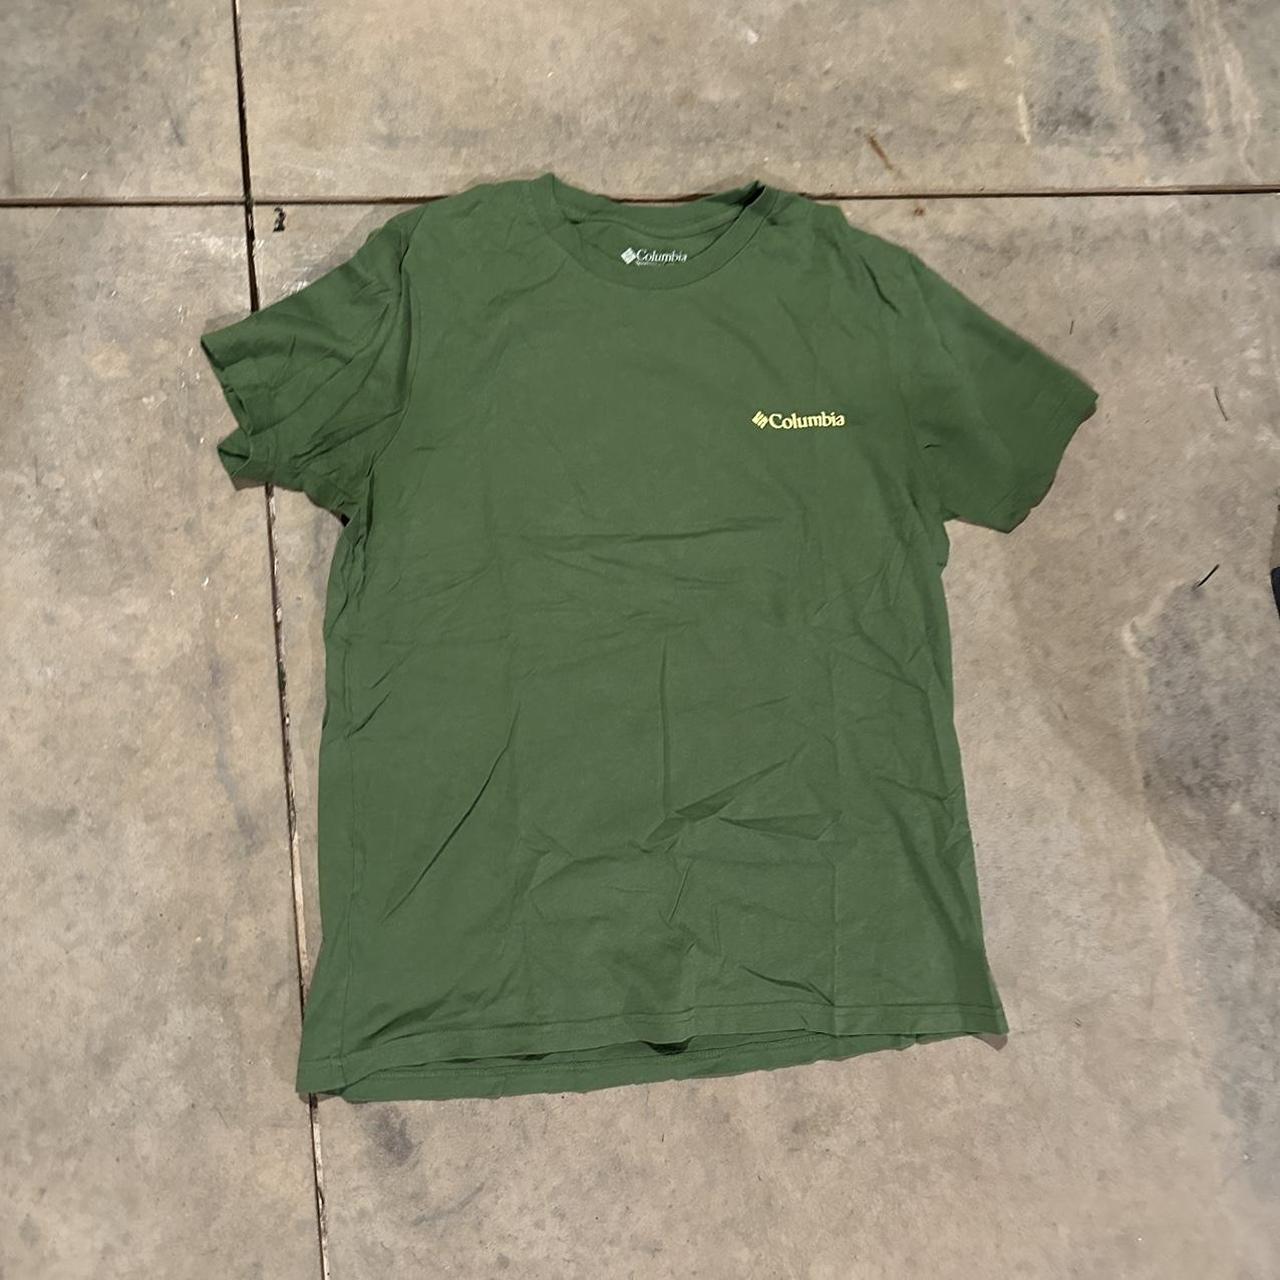 Columbia tee Worn but condition is great - Depop